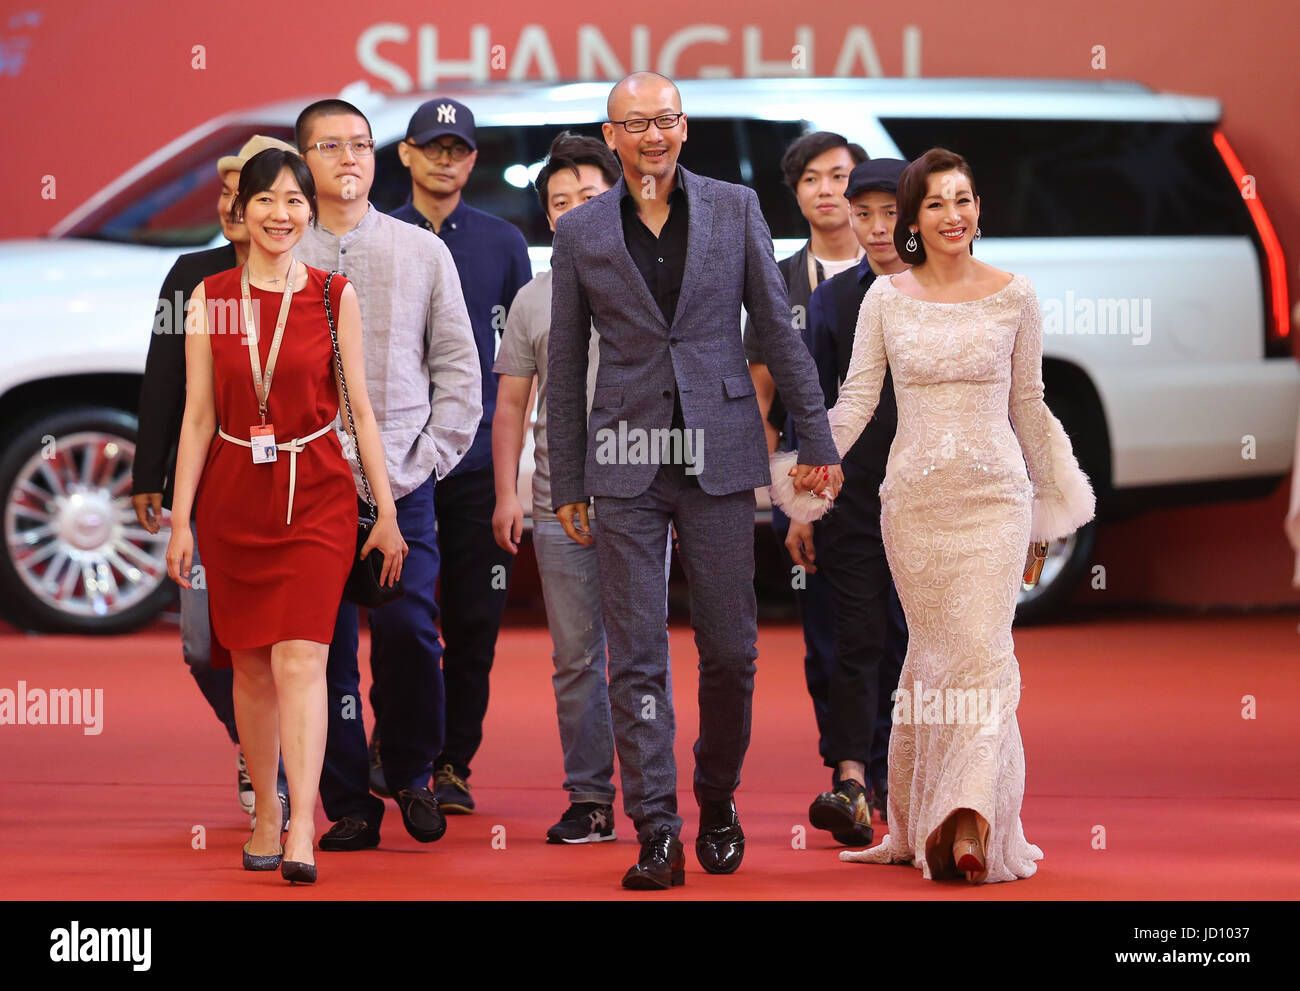 Shanghai, China. 17th June, 2017. Director Guan Hu (C) and actress Qin Hailu (1st R) attend the 20th Shanghai International Film Festival in Shanghai, east China, June 17, 2017. The 20th Shanghai International Film Festival kicked off here Saturday. Credit: Ding Ting/Xinhua/Alamy Live News Stock Photo